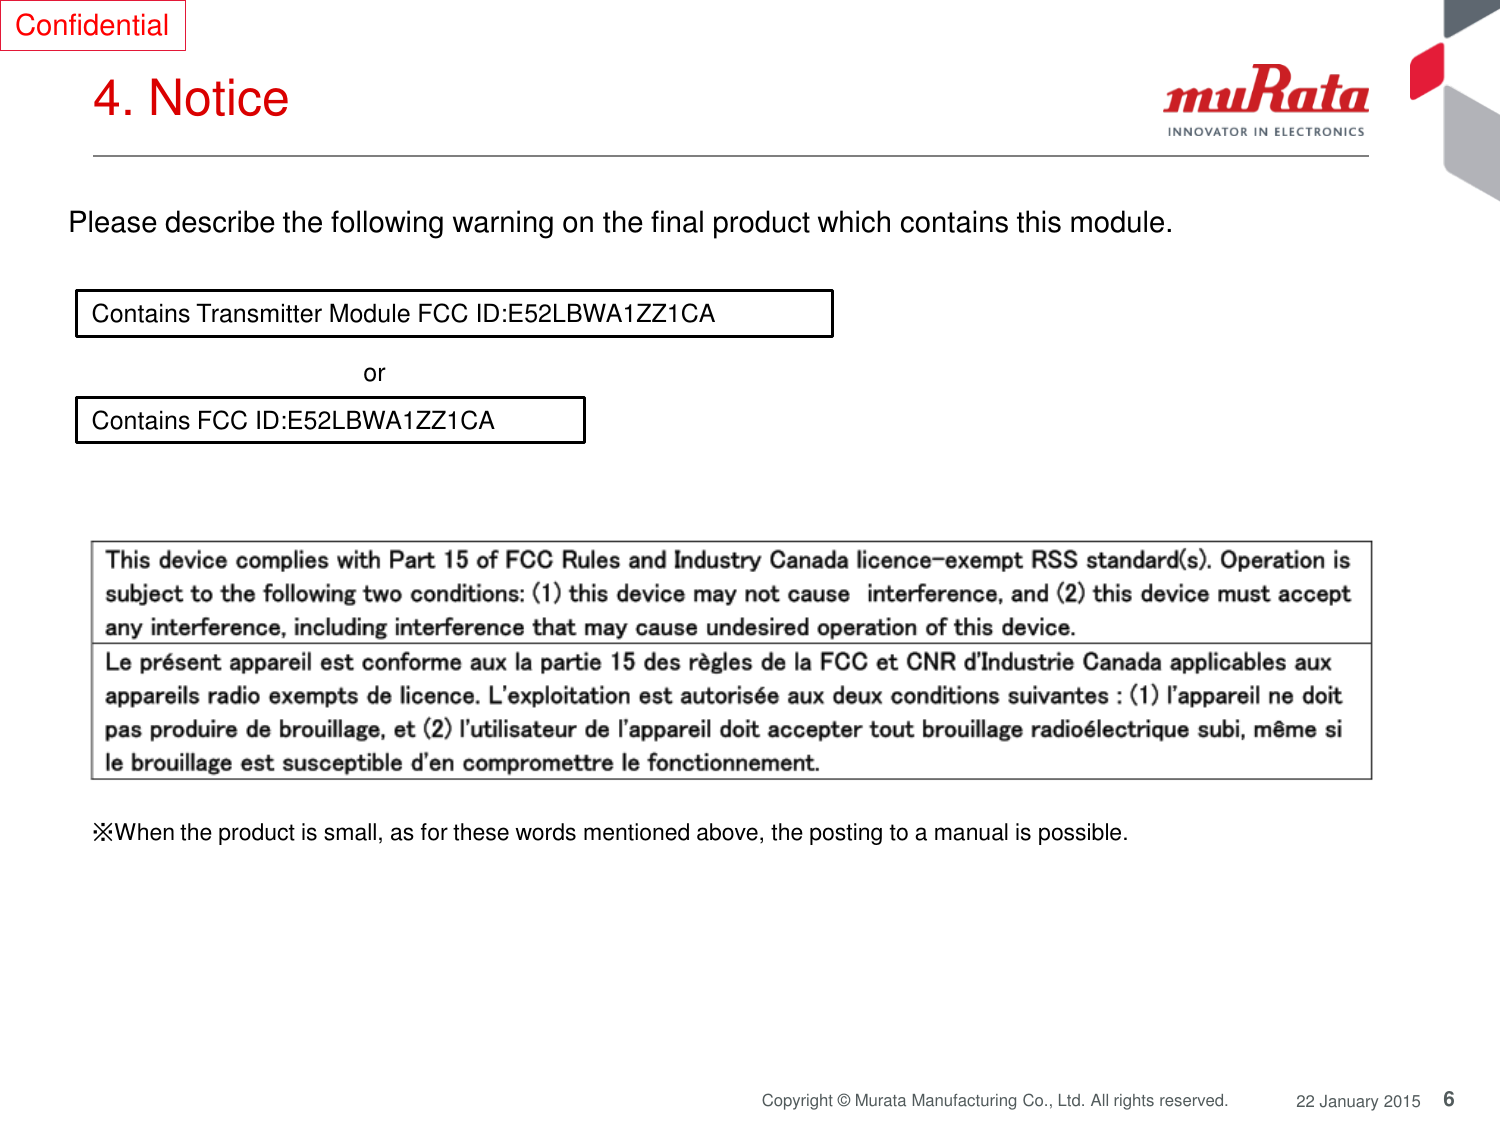 6 Copyright © Murata Manufacturing Co., Ltd. All rights reserved.  22 January 2015 4. Notice  Contains Transmitter Module FCC ID:E52LBWA1ZZ1CA Contains FCC ID:E52LBWA1ZZ1CA or  Please describe the following warning on the final product which contains this module.  Confidential ※When the product is small, as for these words mentioned above, the posting to a manual is possible. 